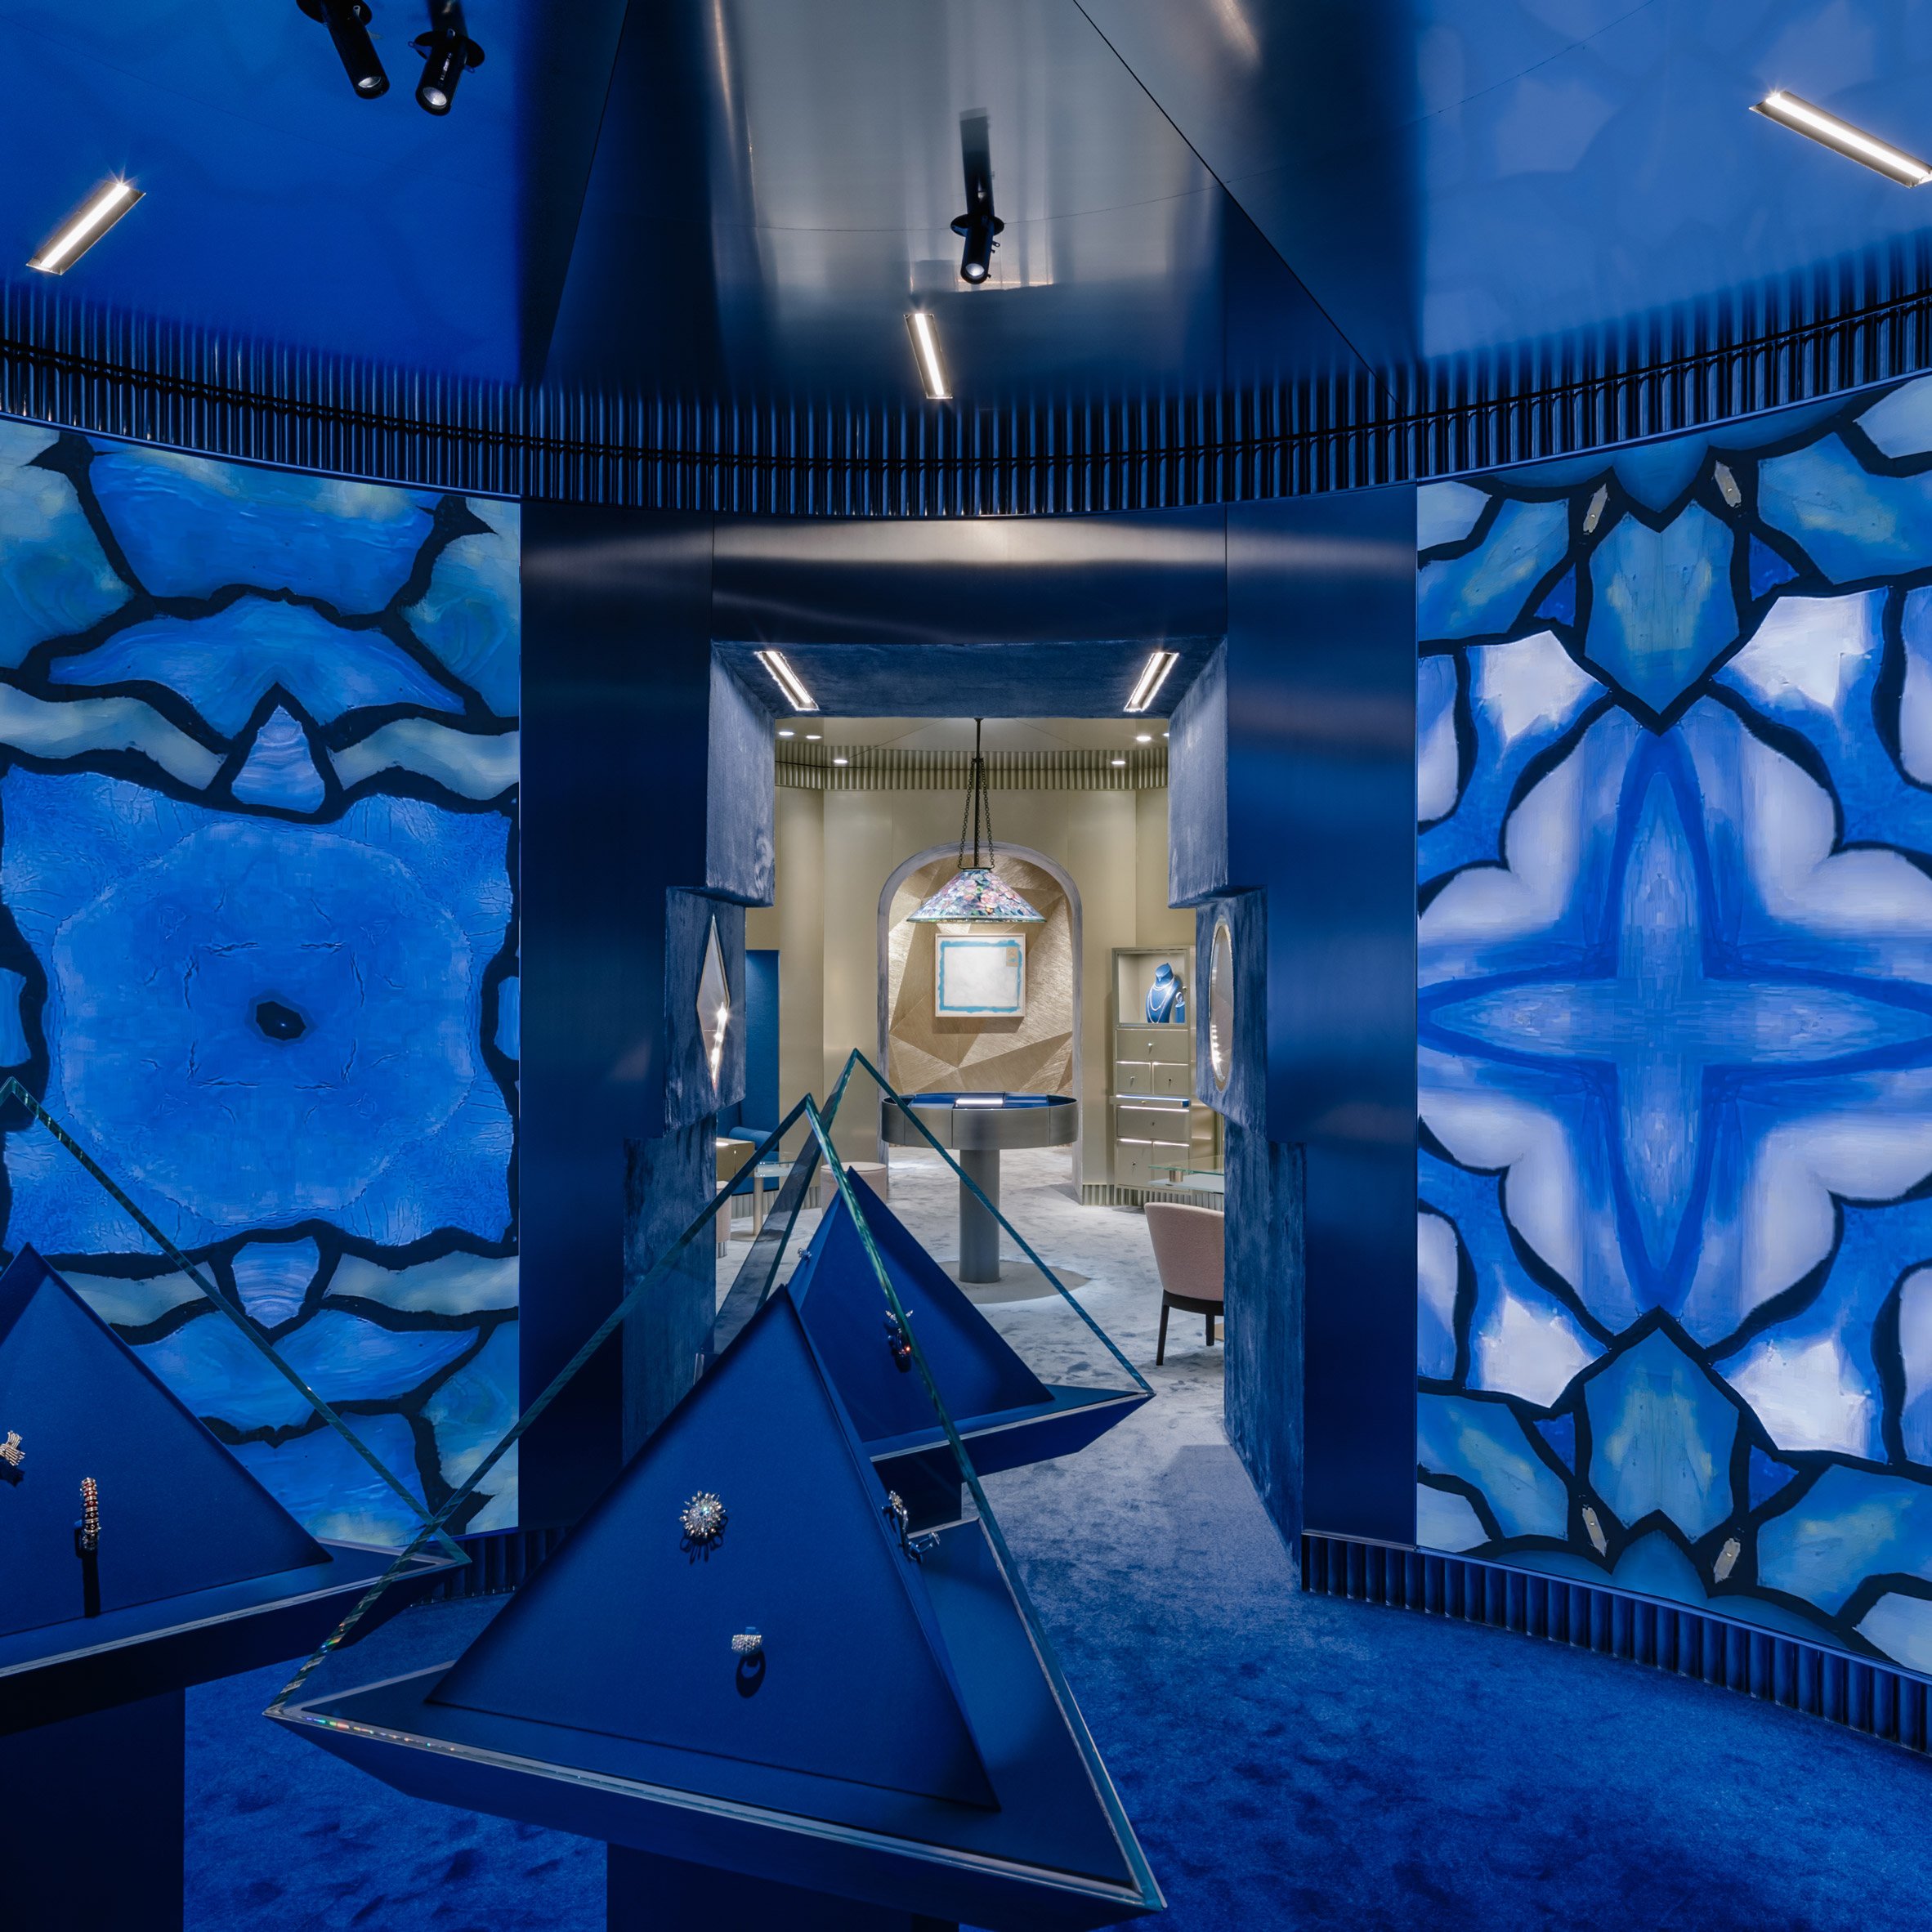 Tiffany & Co's Paris pop-up by OMA takes visitors on journey across time